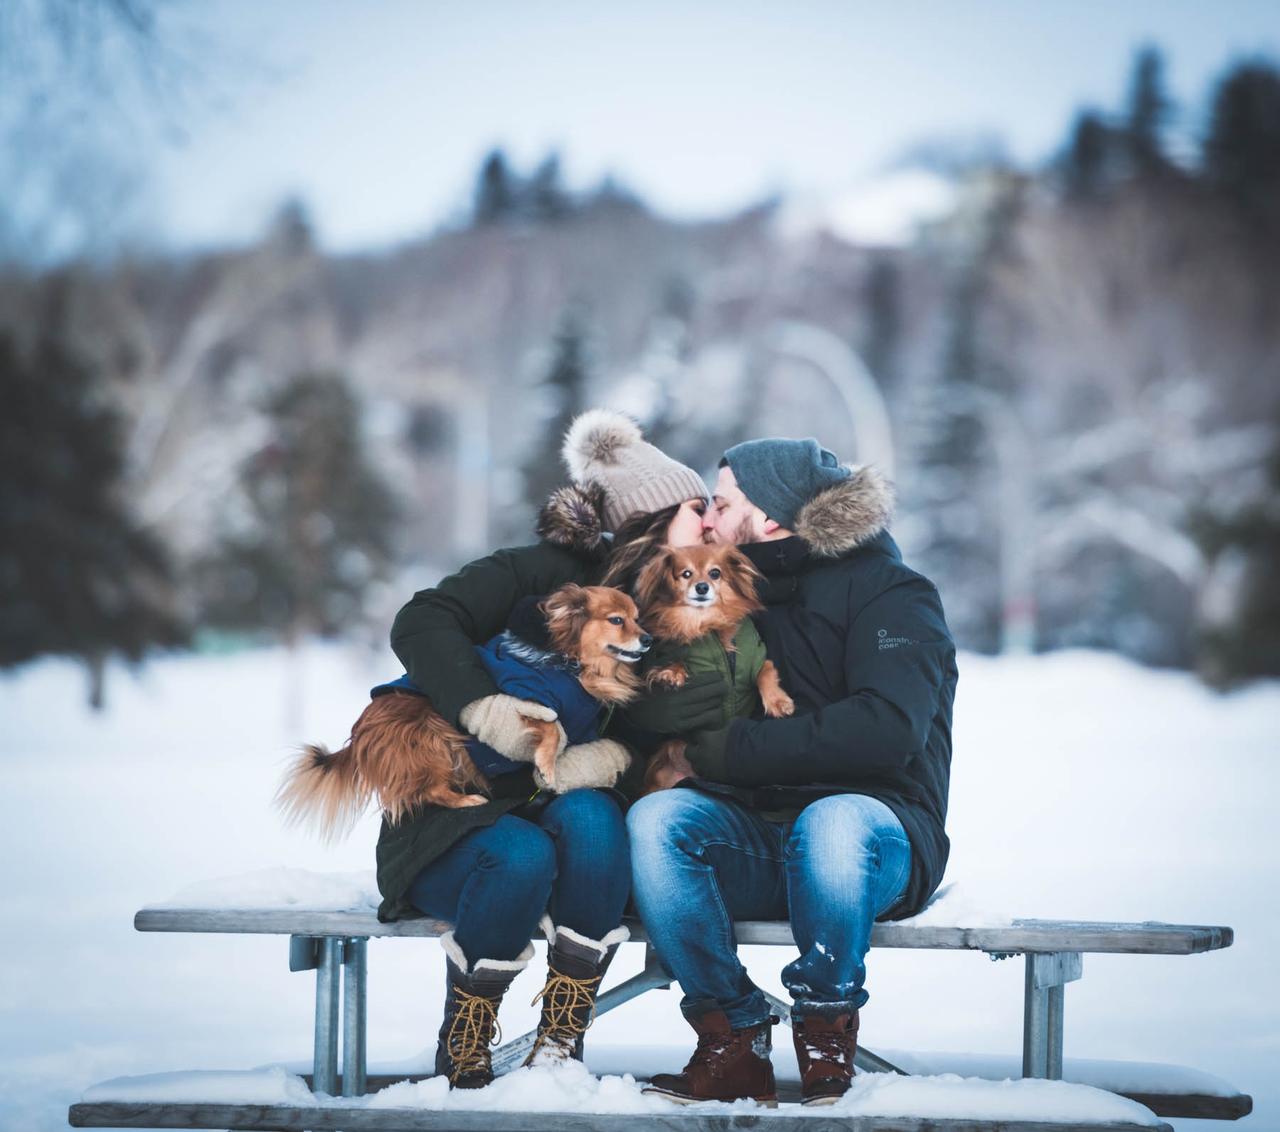 Winter Engagement Photoshoot Ideas at Huyck Preserve - Courtney Stannard  Photography